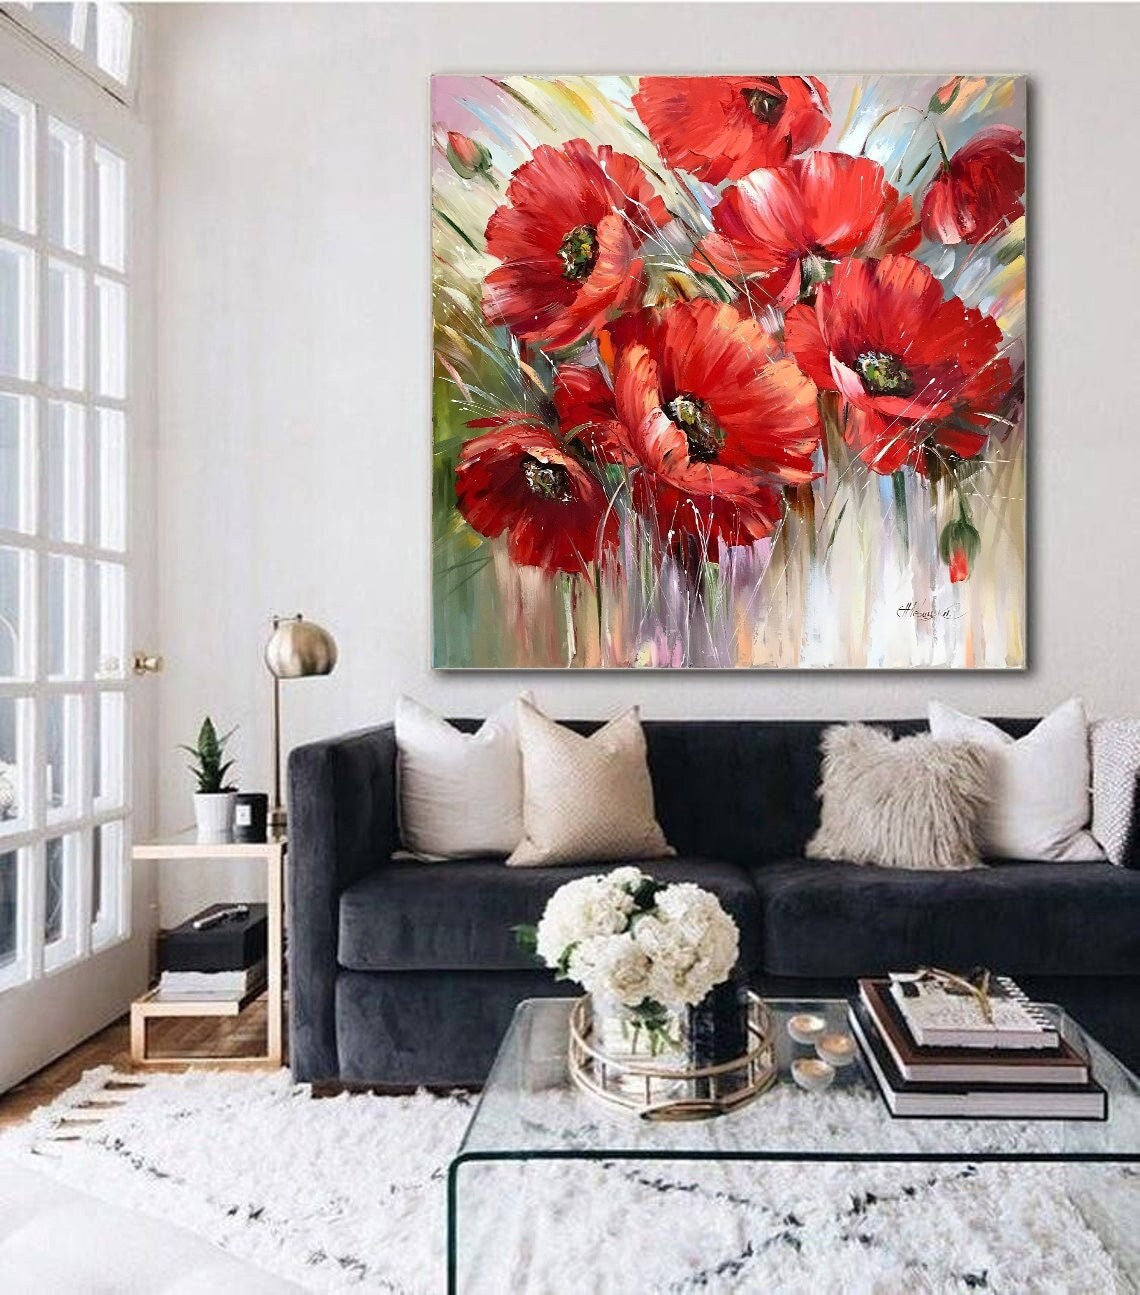 Little Mouse Sitting on Poppies 30 in x 40 in Painting Canvas Art Print, by Designart